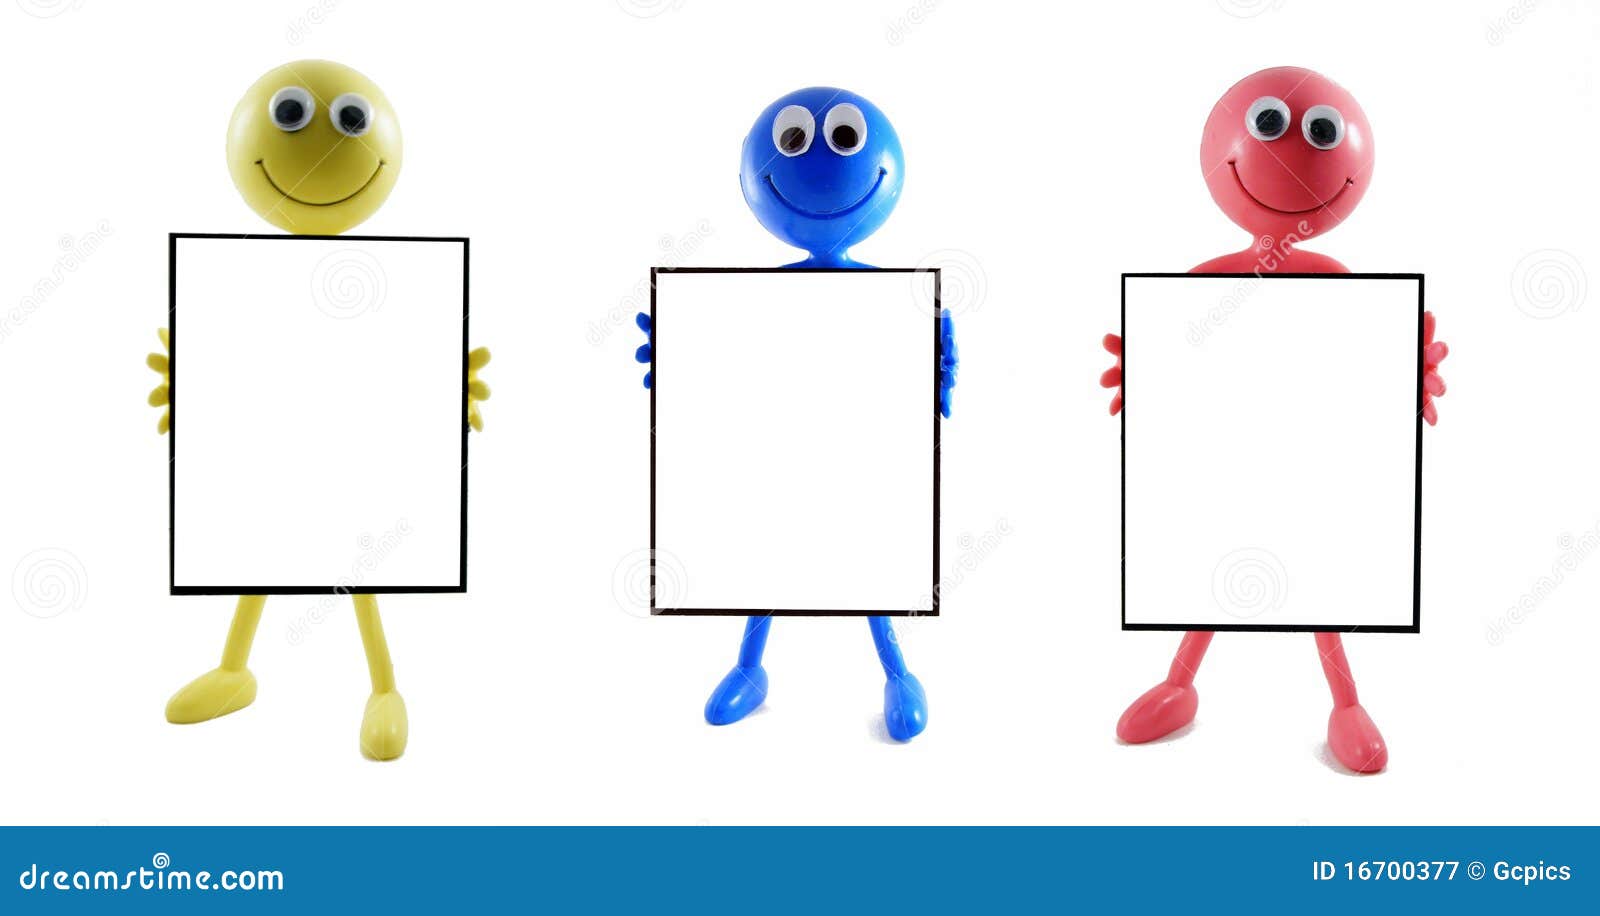 3 blank advert boards with smilies